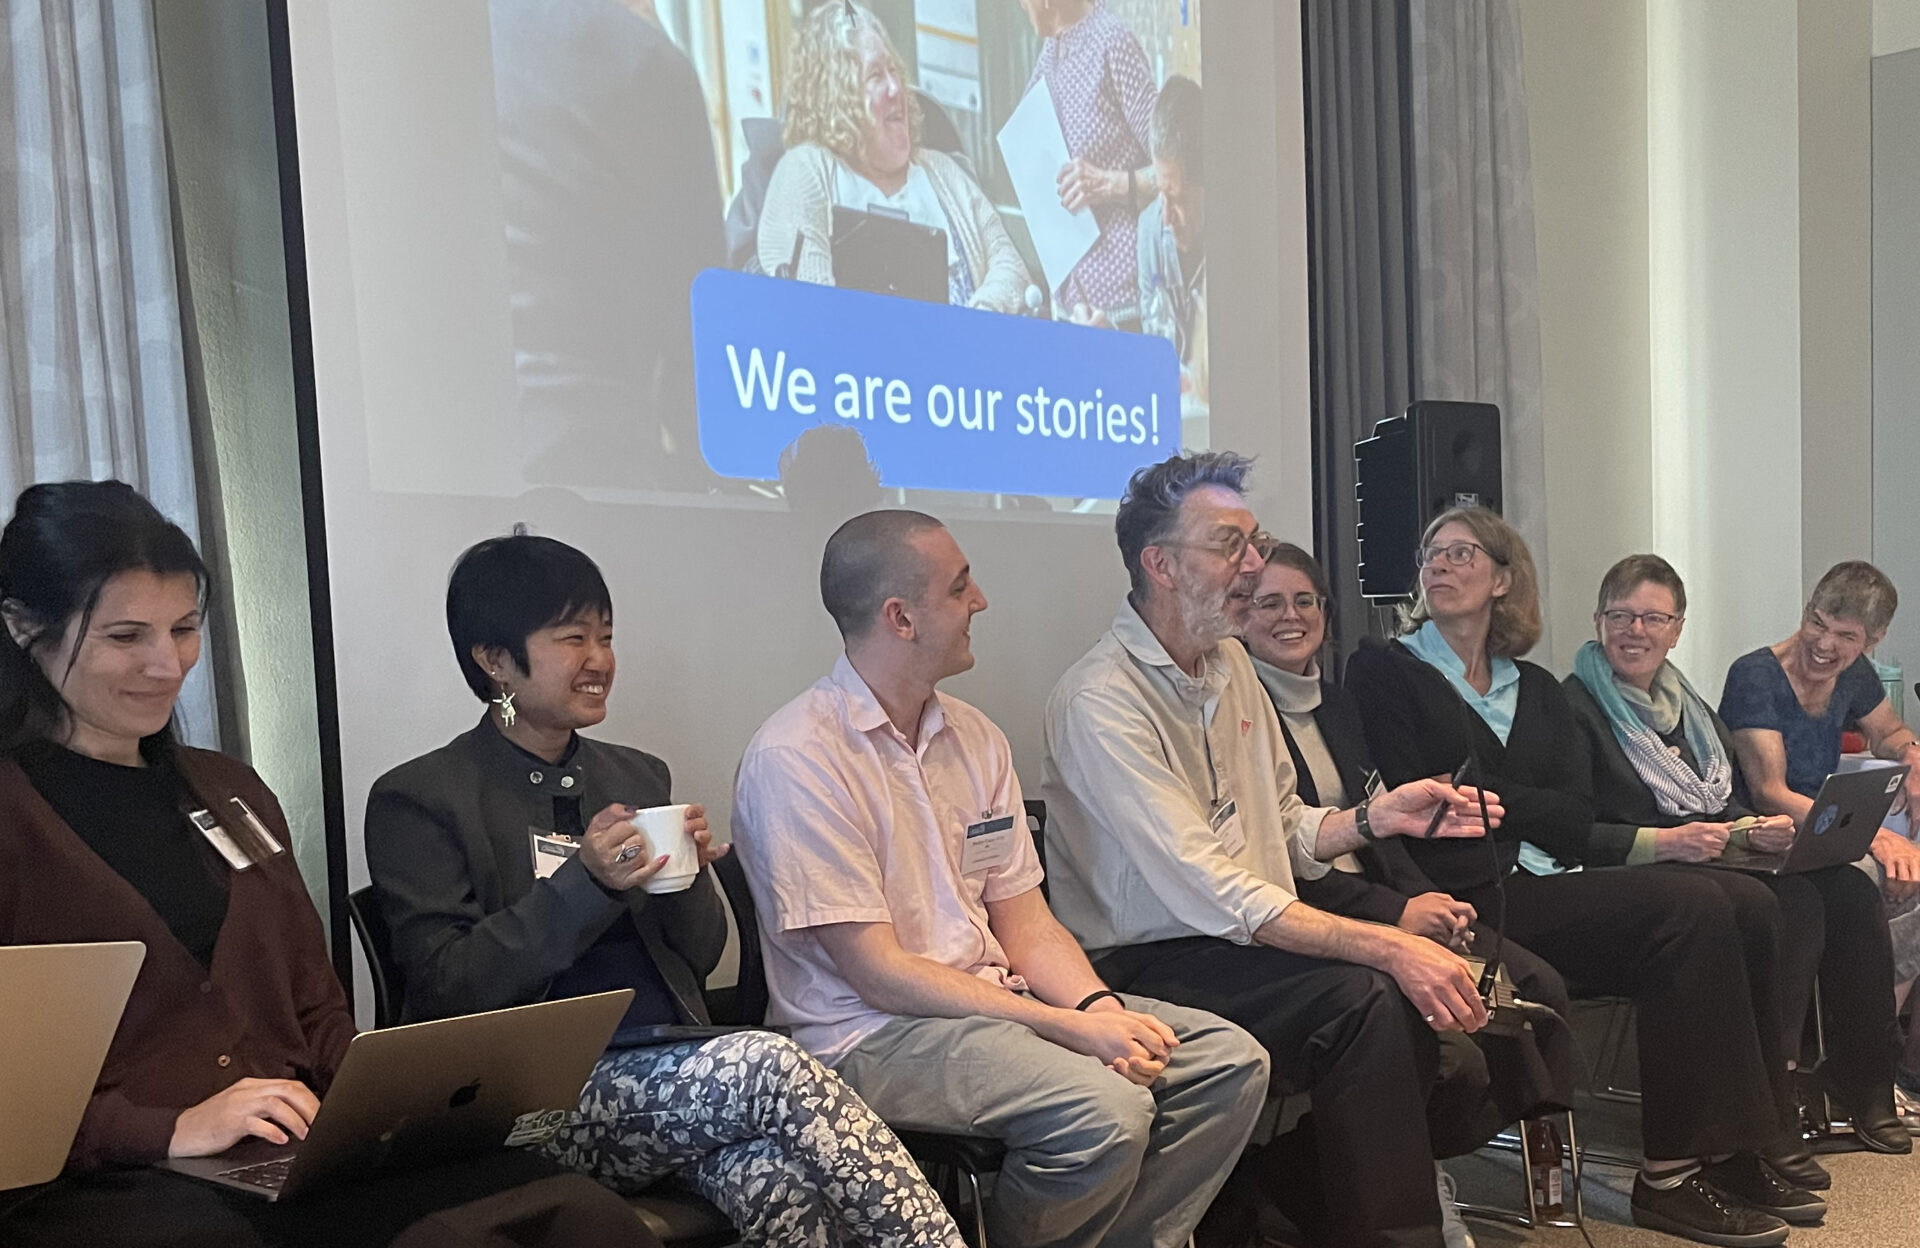 Eight people – a mix of female and male; disabled and non-disabled; of younger and older working ages – are seated in a row, enjoying a convivial discussion. A screen above shows an image of disabled and non-disabled people in conversation, with a large title 'We are our stories!'